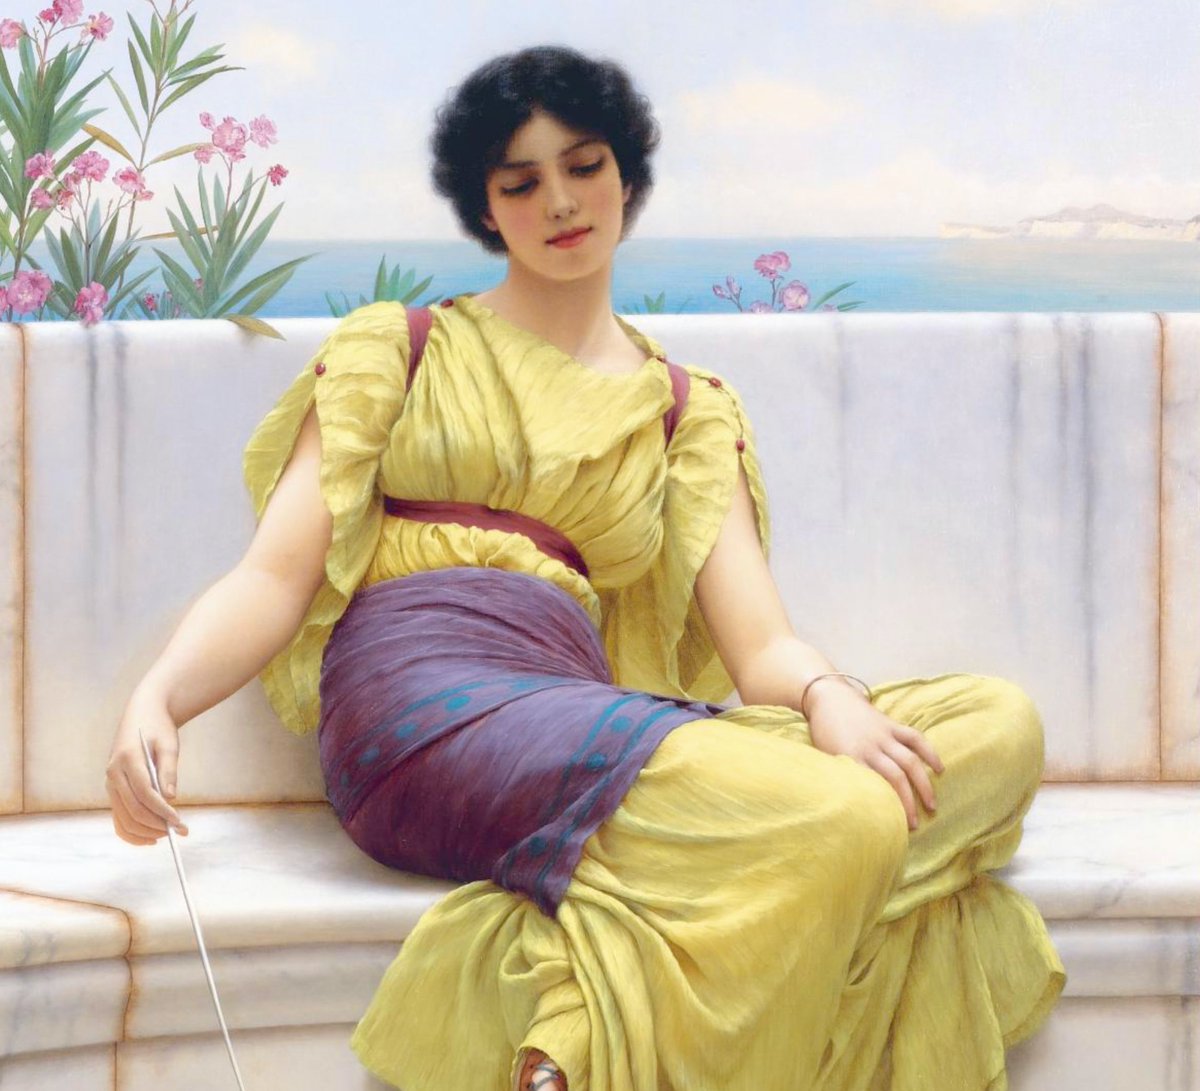 I share paintings from great artists but I would like to highlight the story of a hidden gem: John William Godward Few people who follow art know his name. And his life-arc reminds me of Japanese author Yukio Mishima.